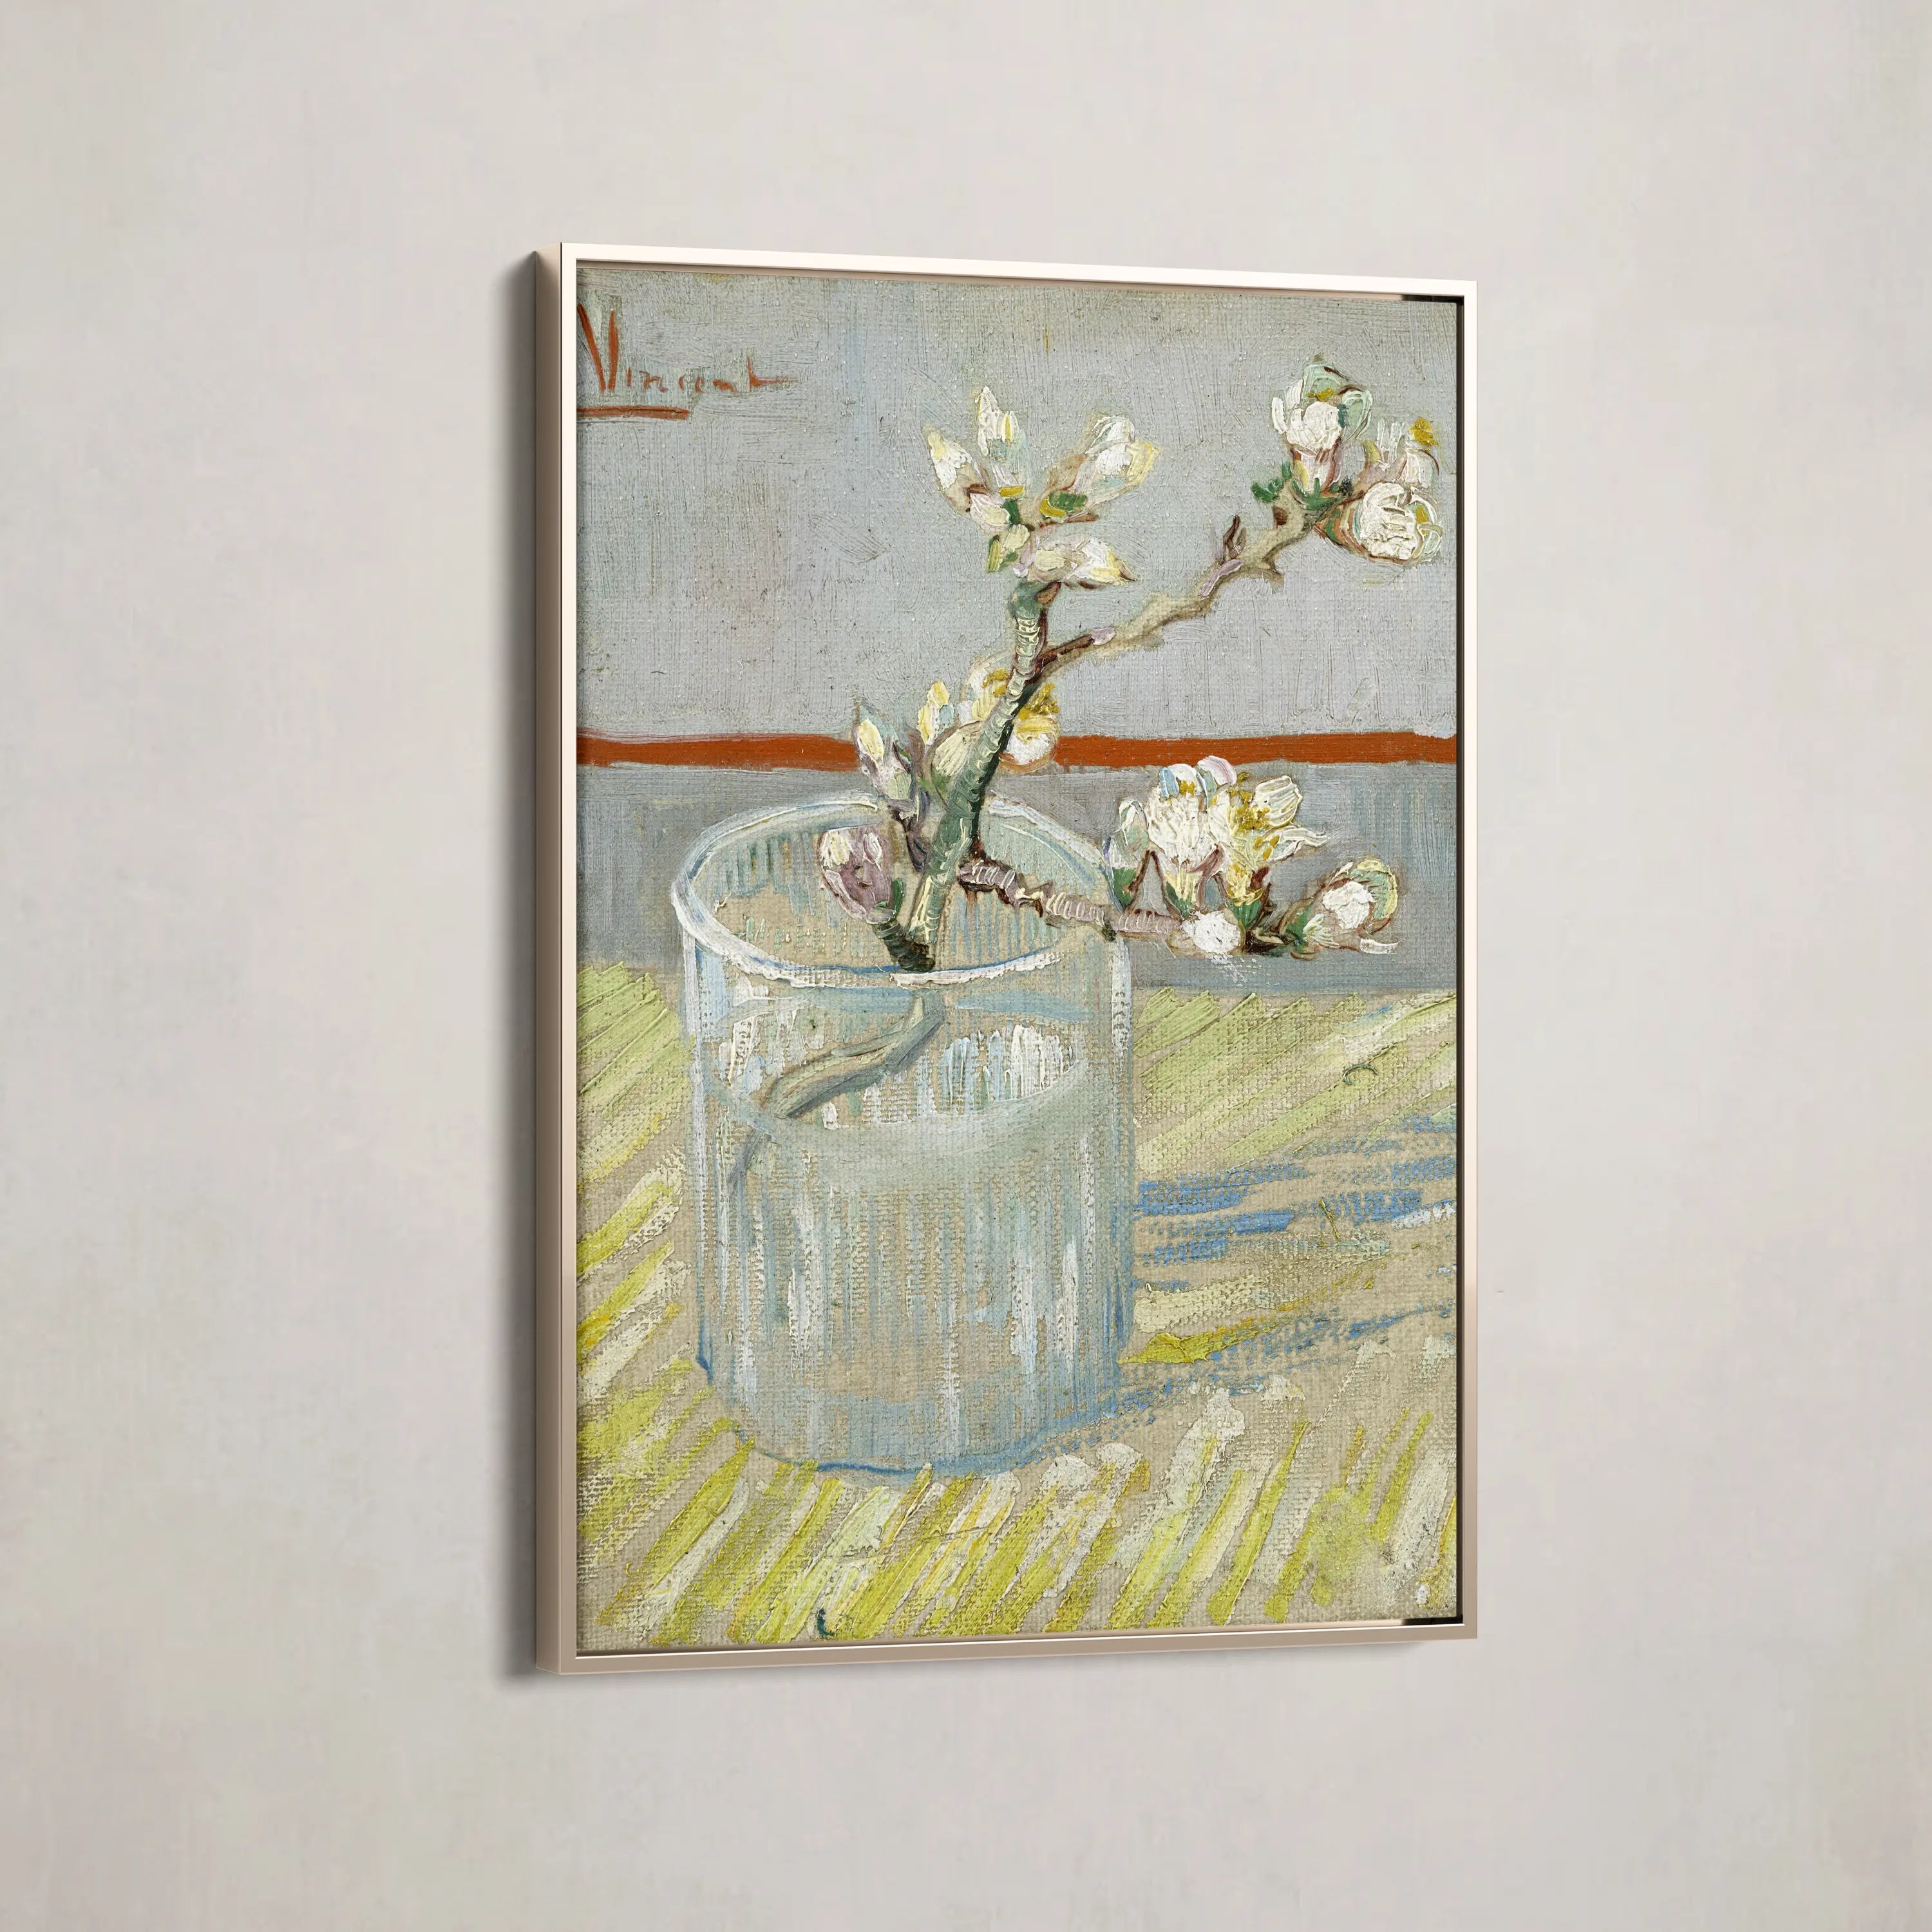 Sprig of flowering almond in a glass (1888) by Vincent van Gogh